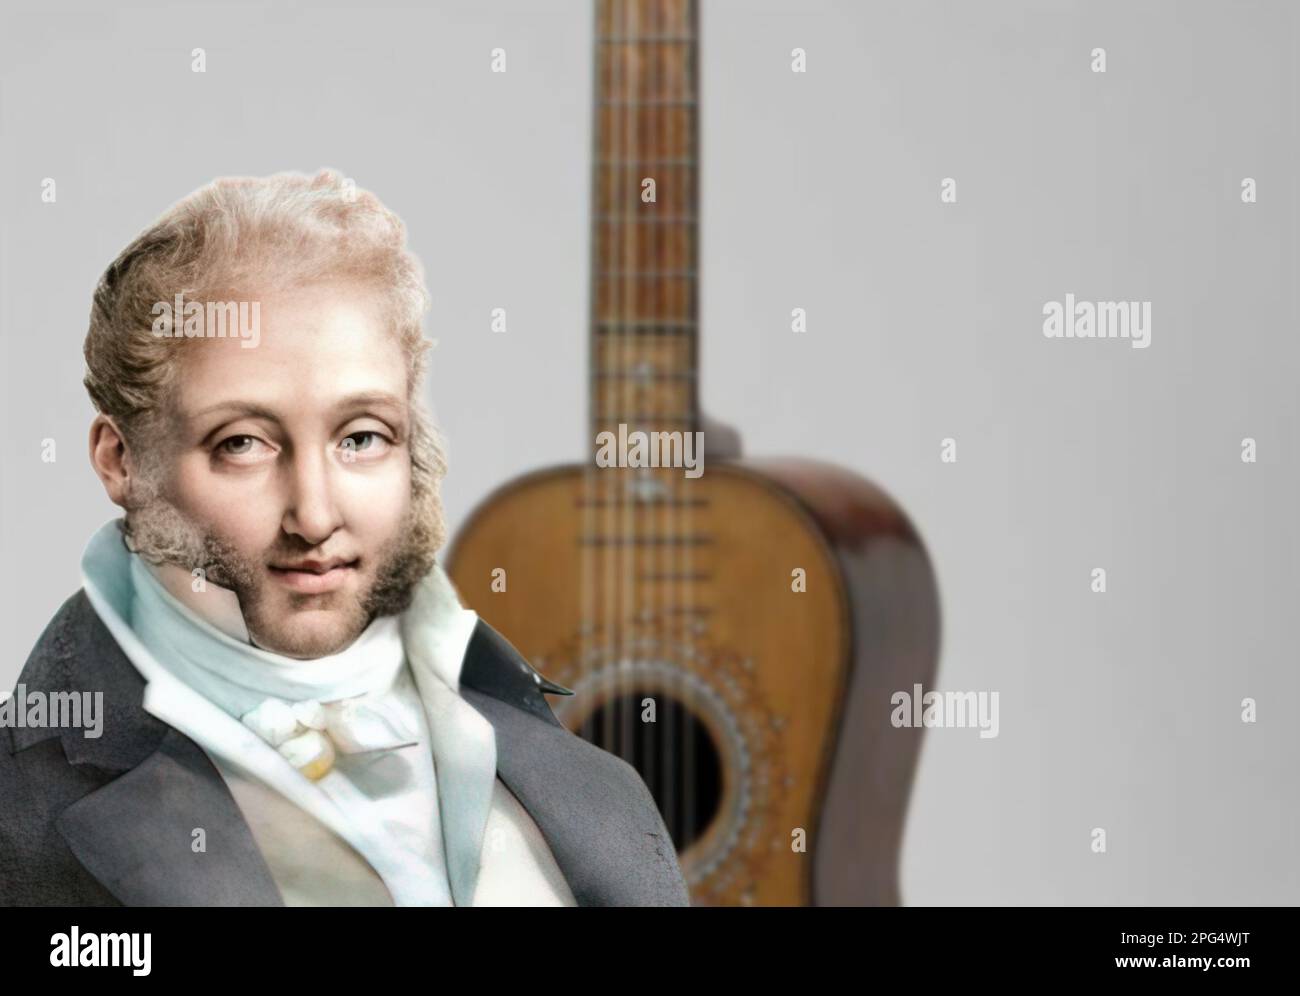 Ferdinando Carulli was an Italian composer and guitarist of the nineteenth century known for his classical guitar methods still used today. Stock Photo